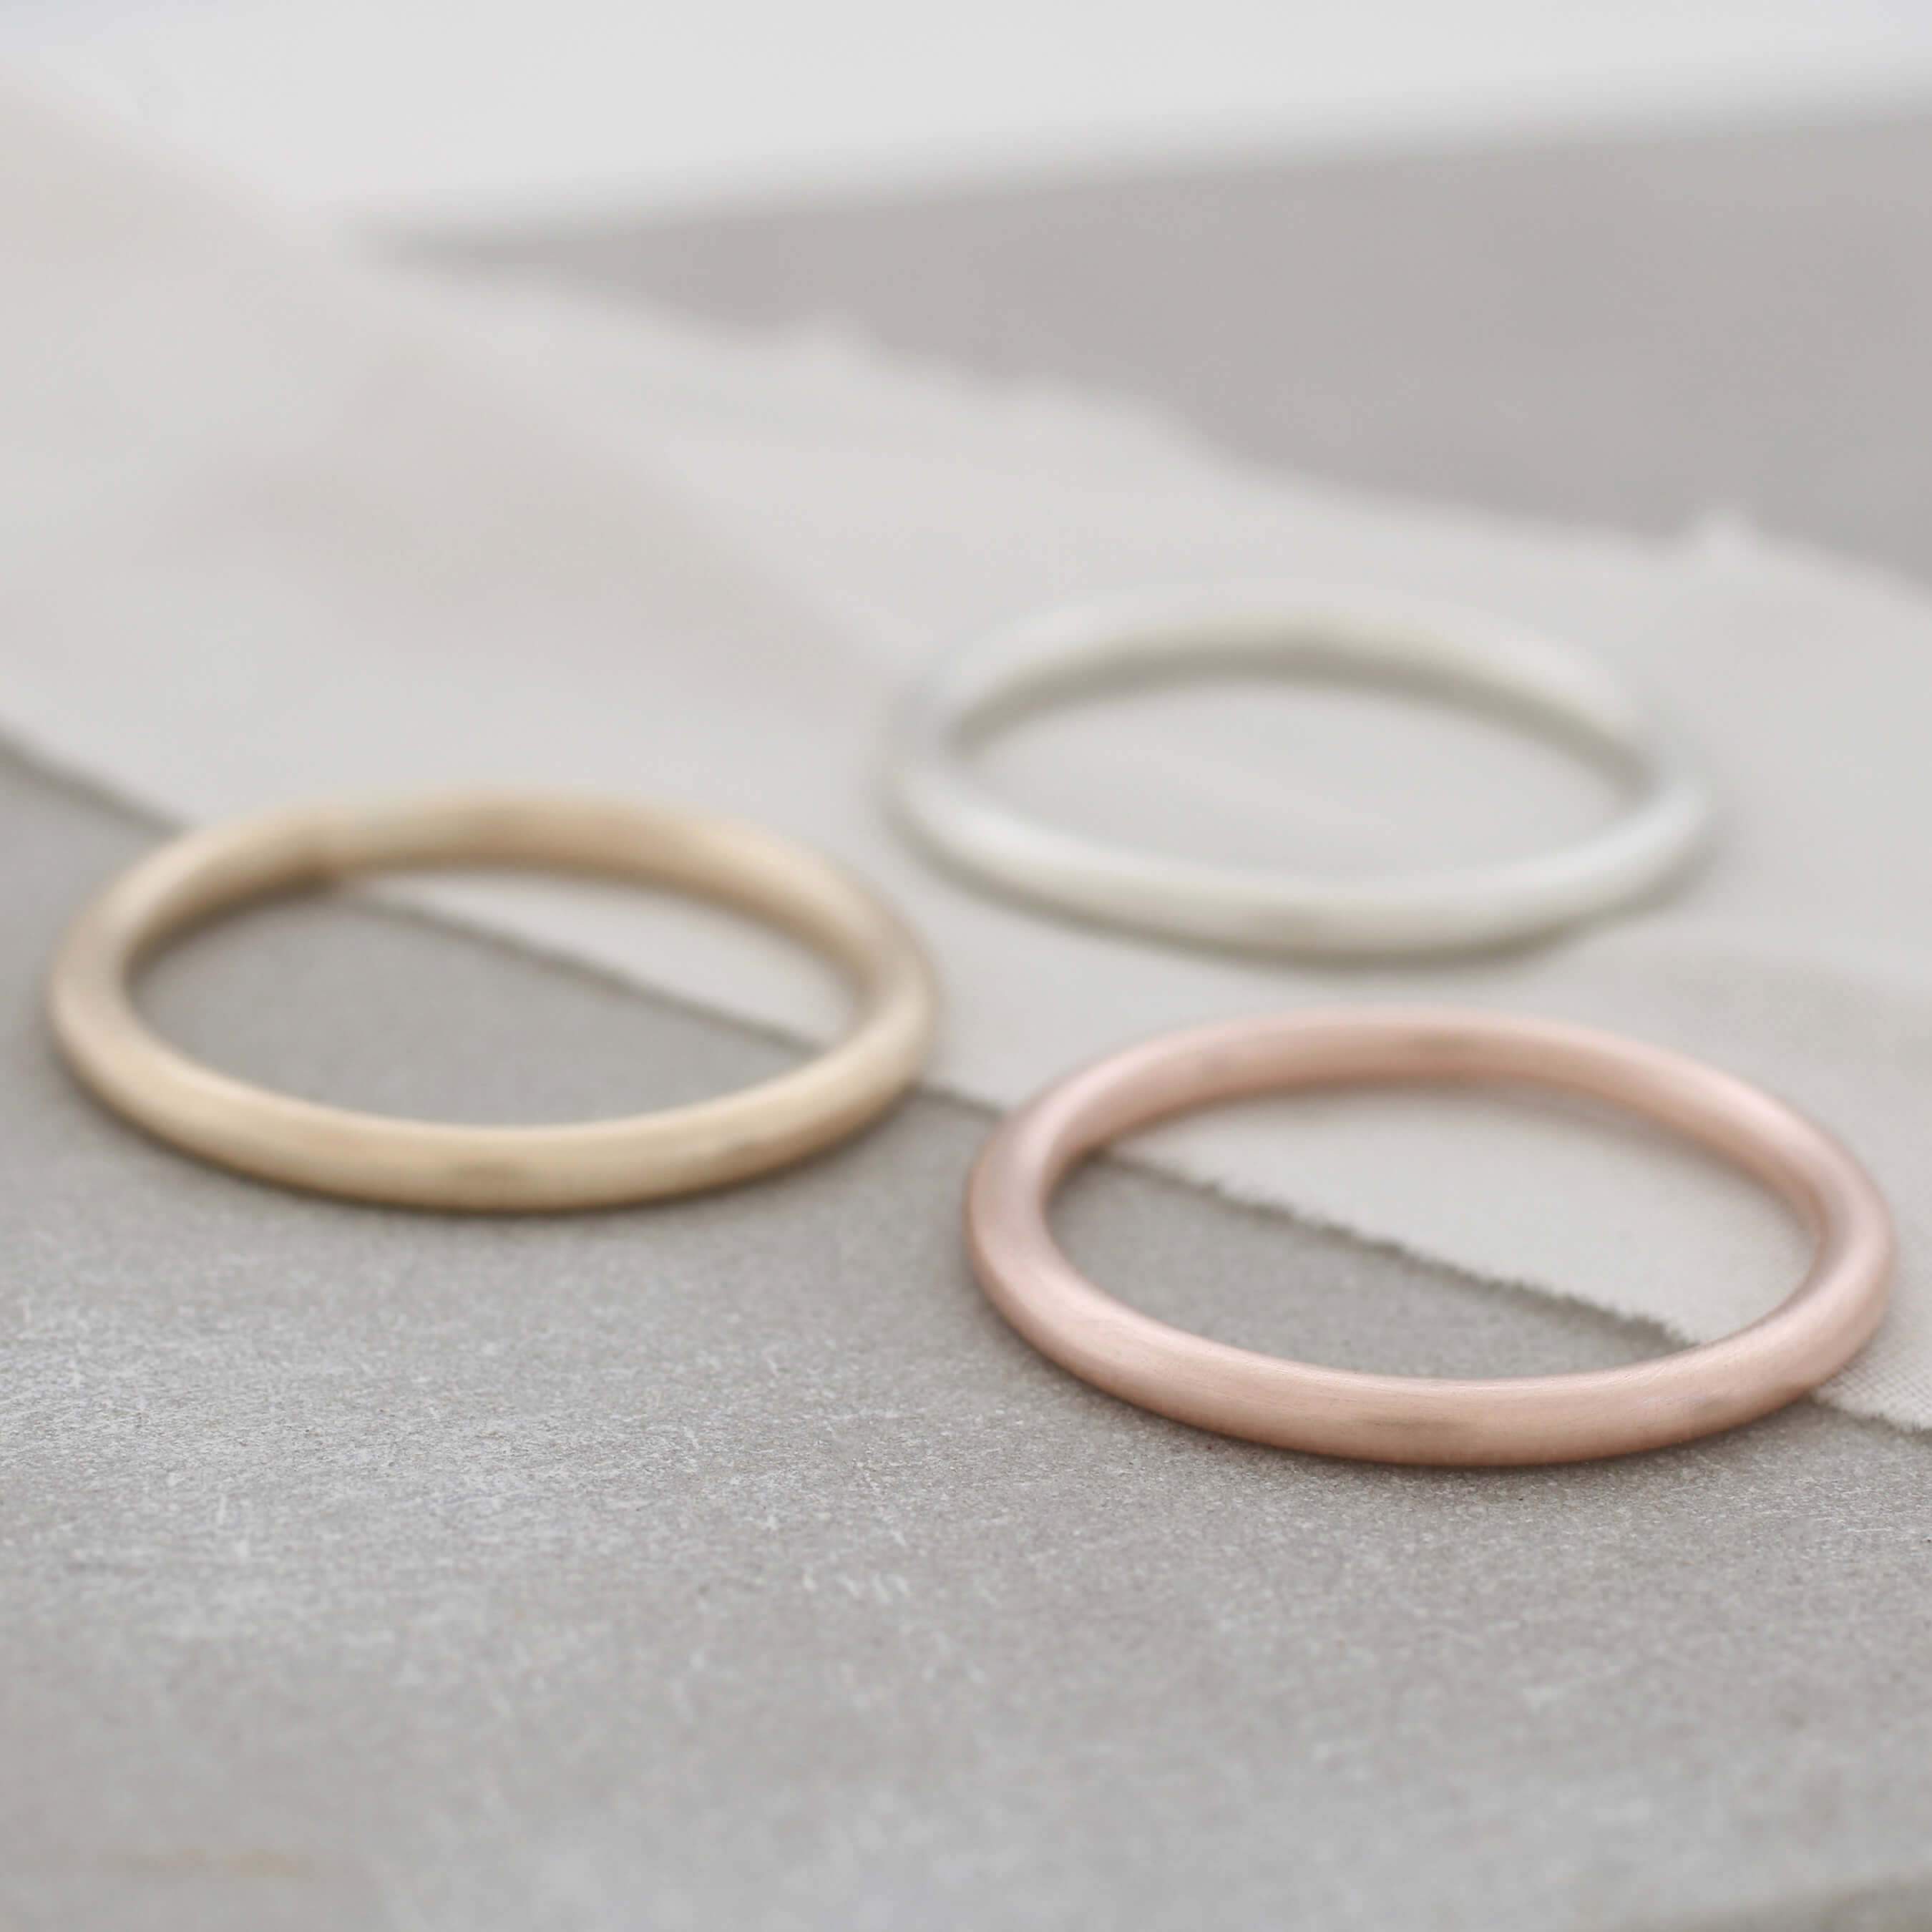 Gold plain round band rings